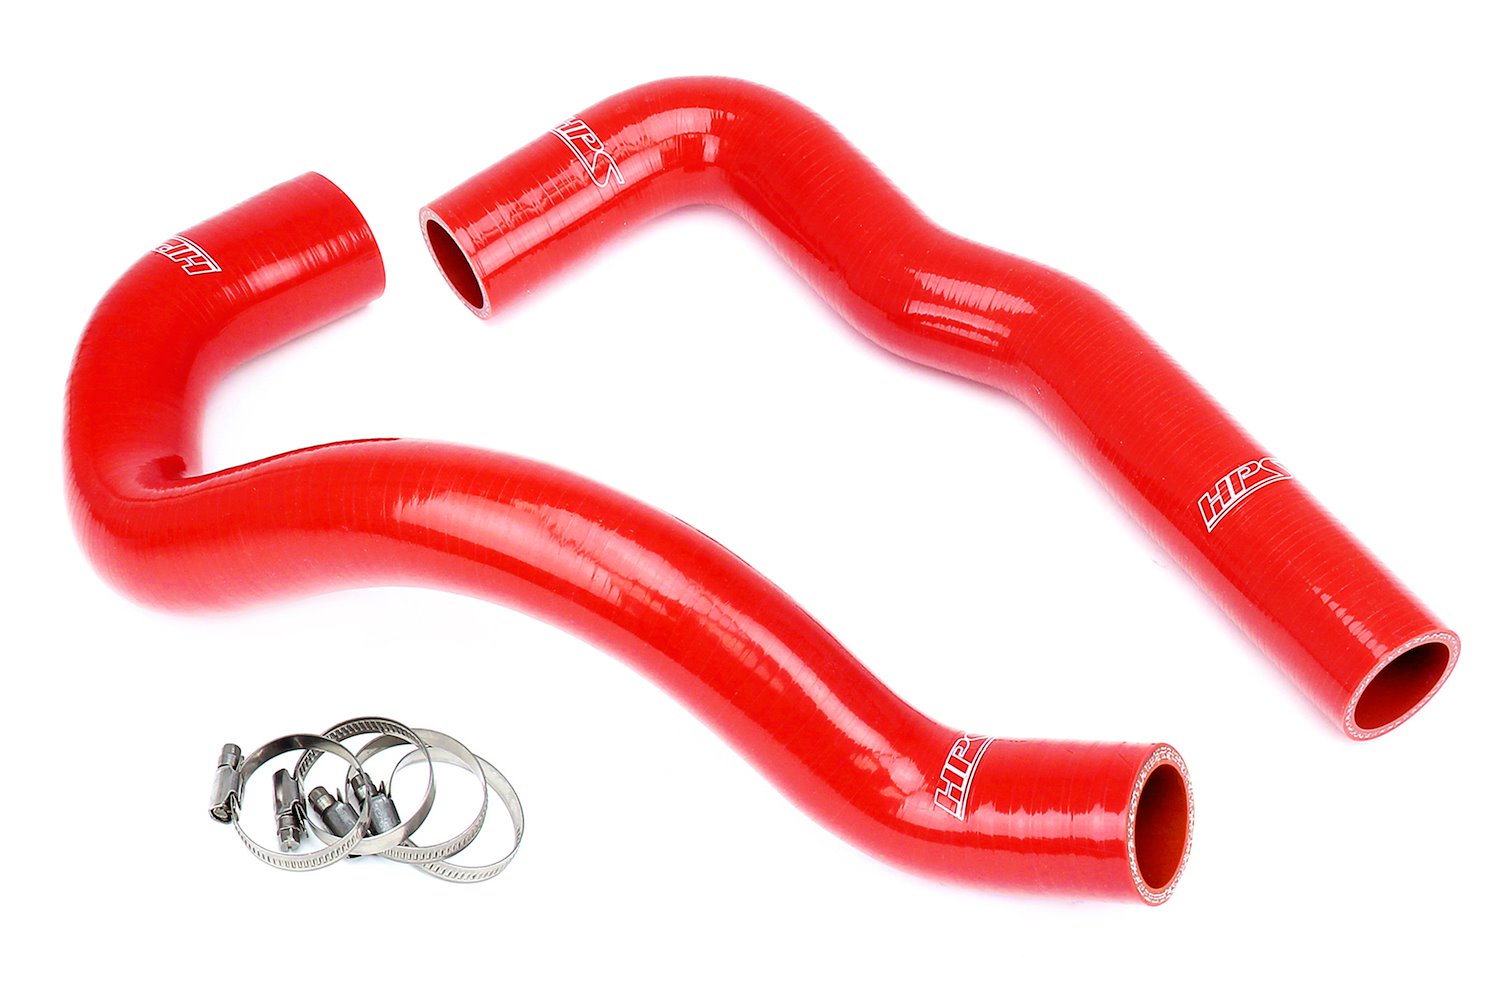 57-2066-RED Radiator Hose Kit, 3-Ply Reinforced Silicone, Replaces Rubber Radiator Coolant Hoses